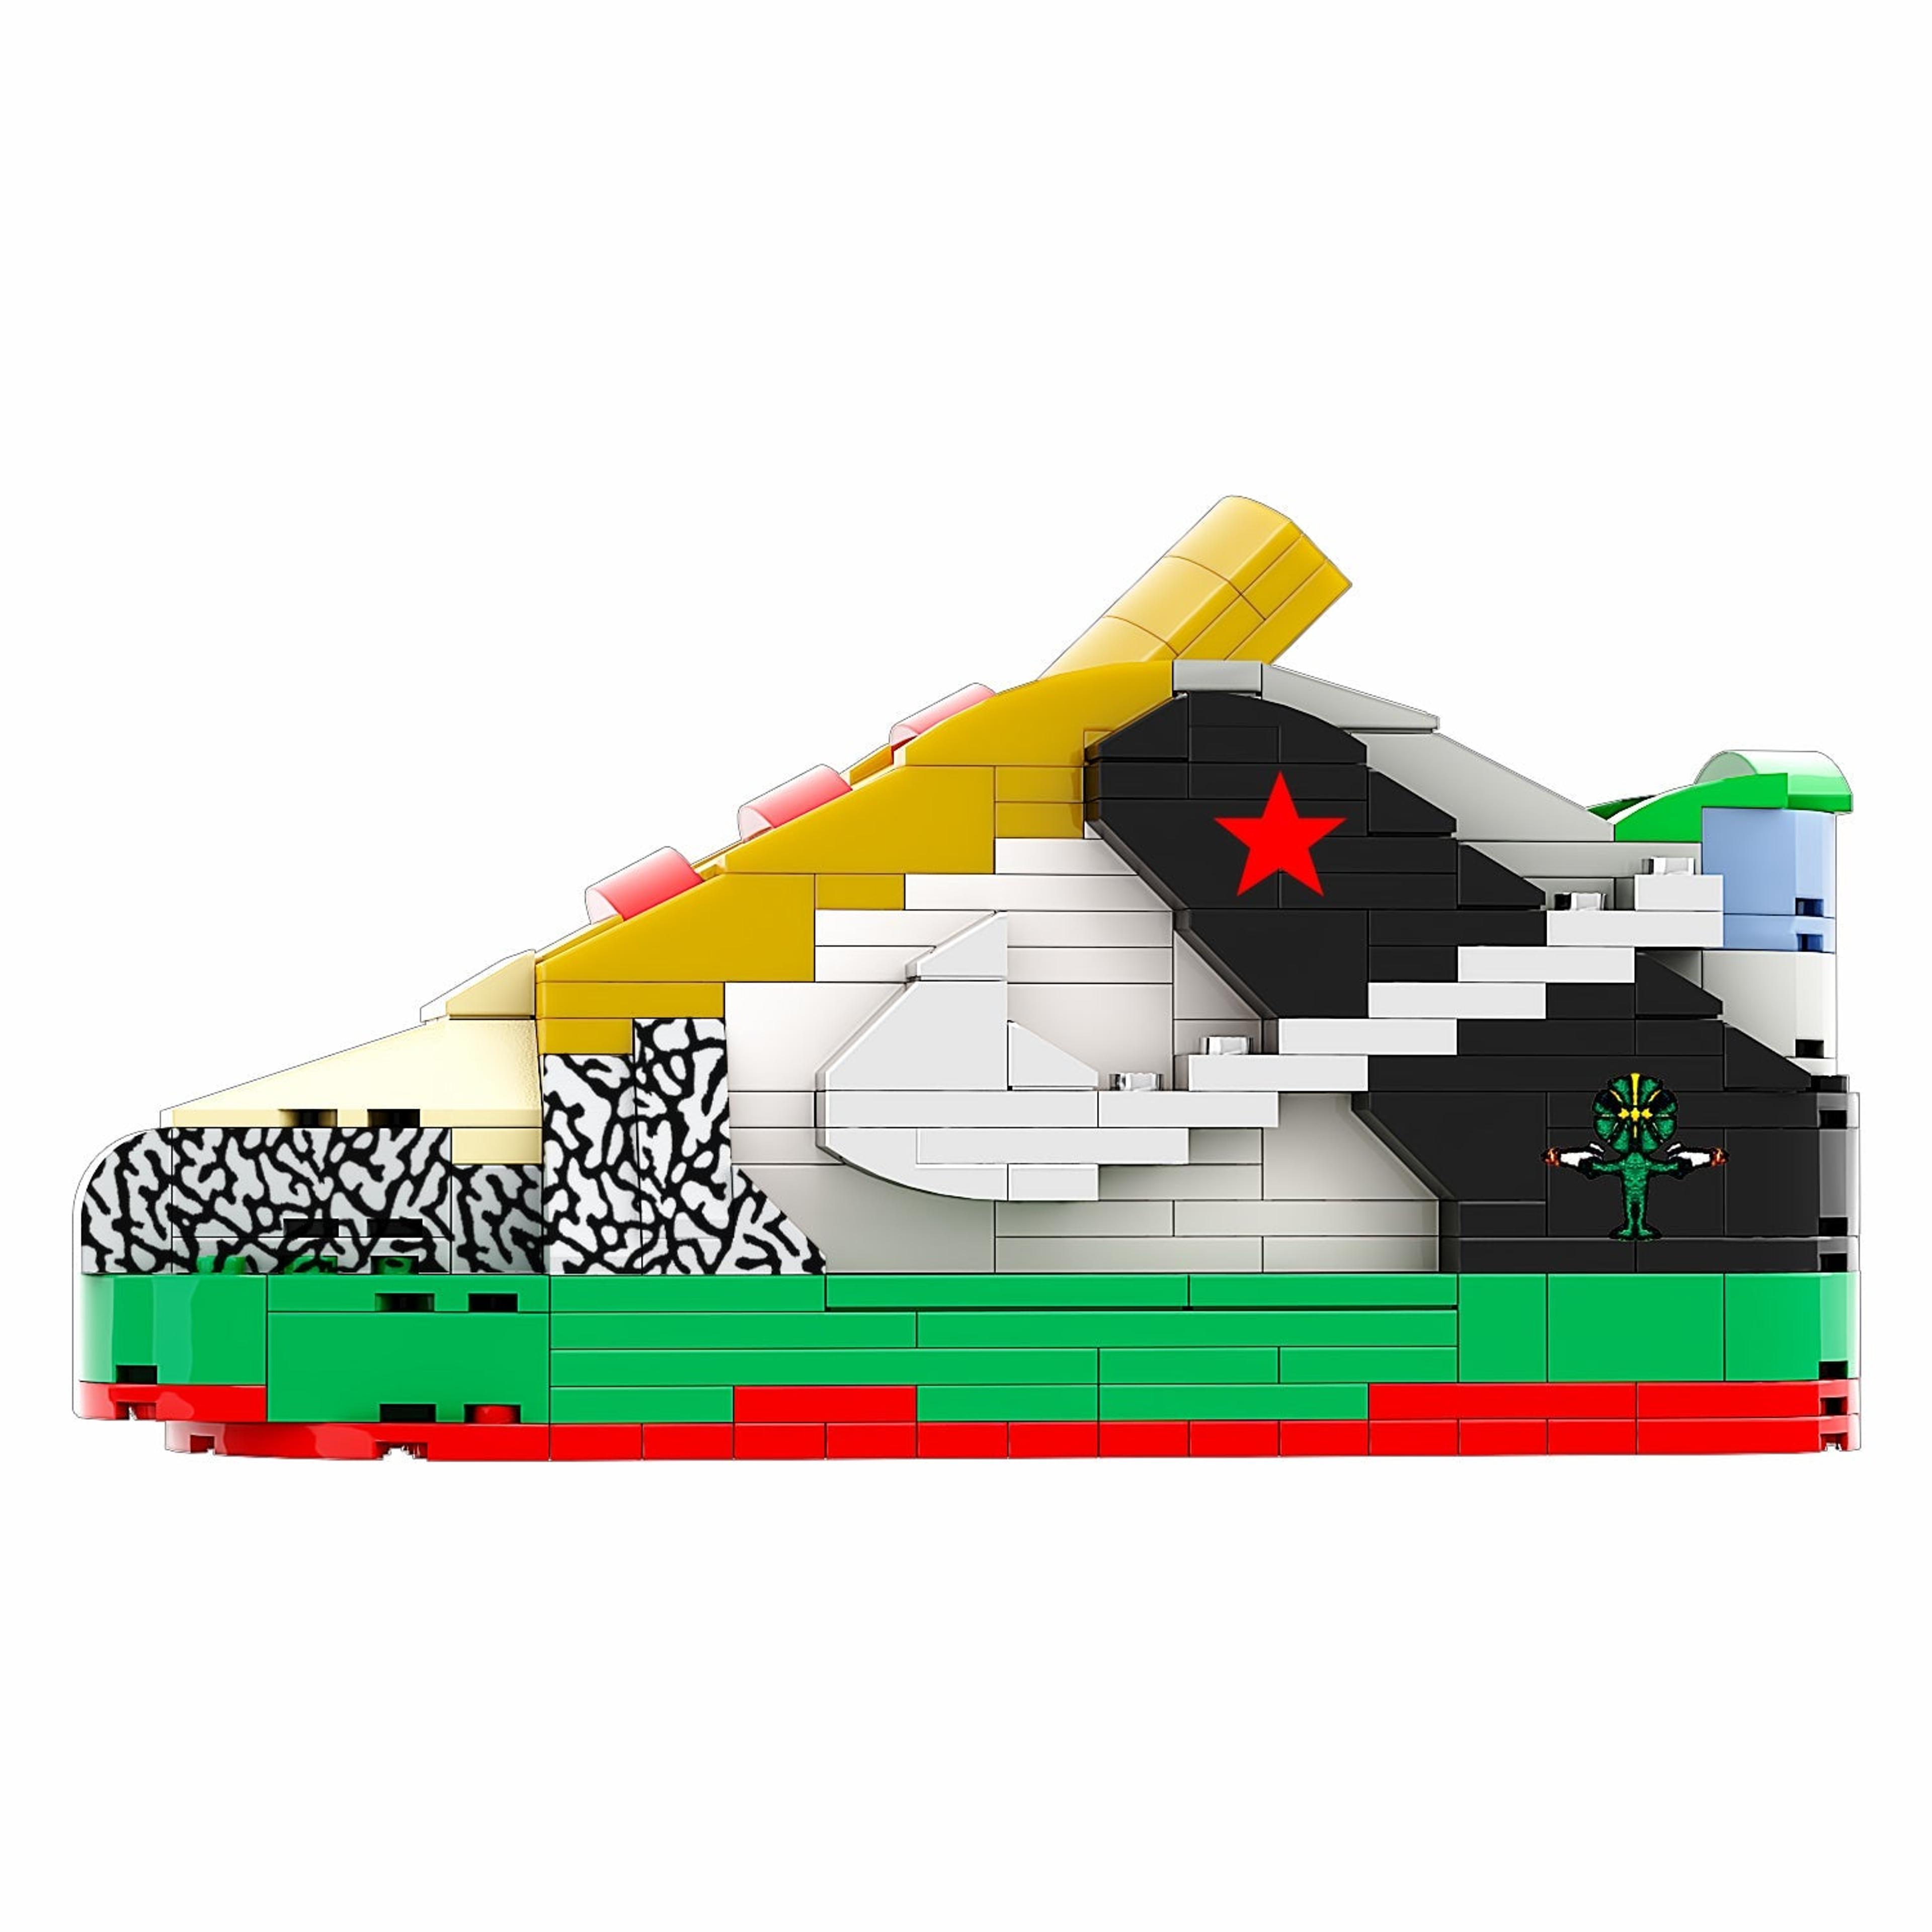 Alternate View 1 of REGULAR  "What the dunk" Sneaker Bricks with Mini Figure